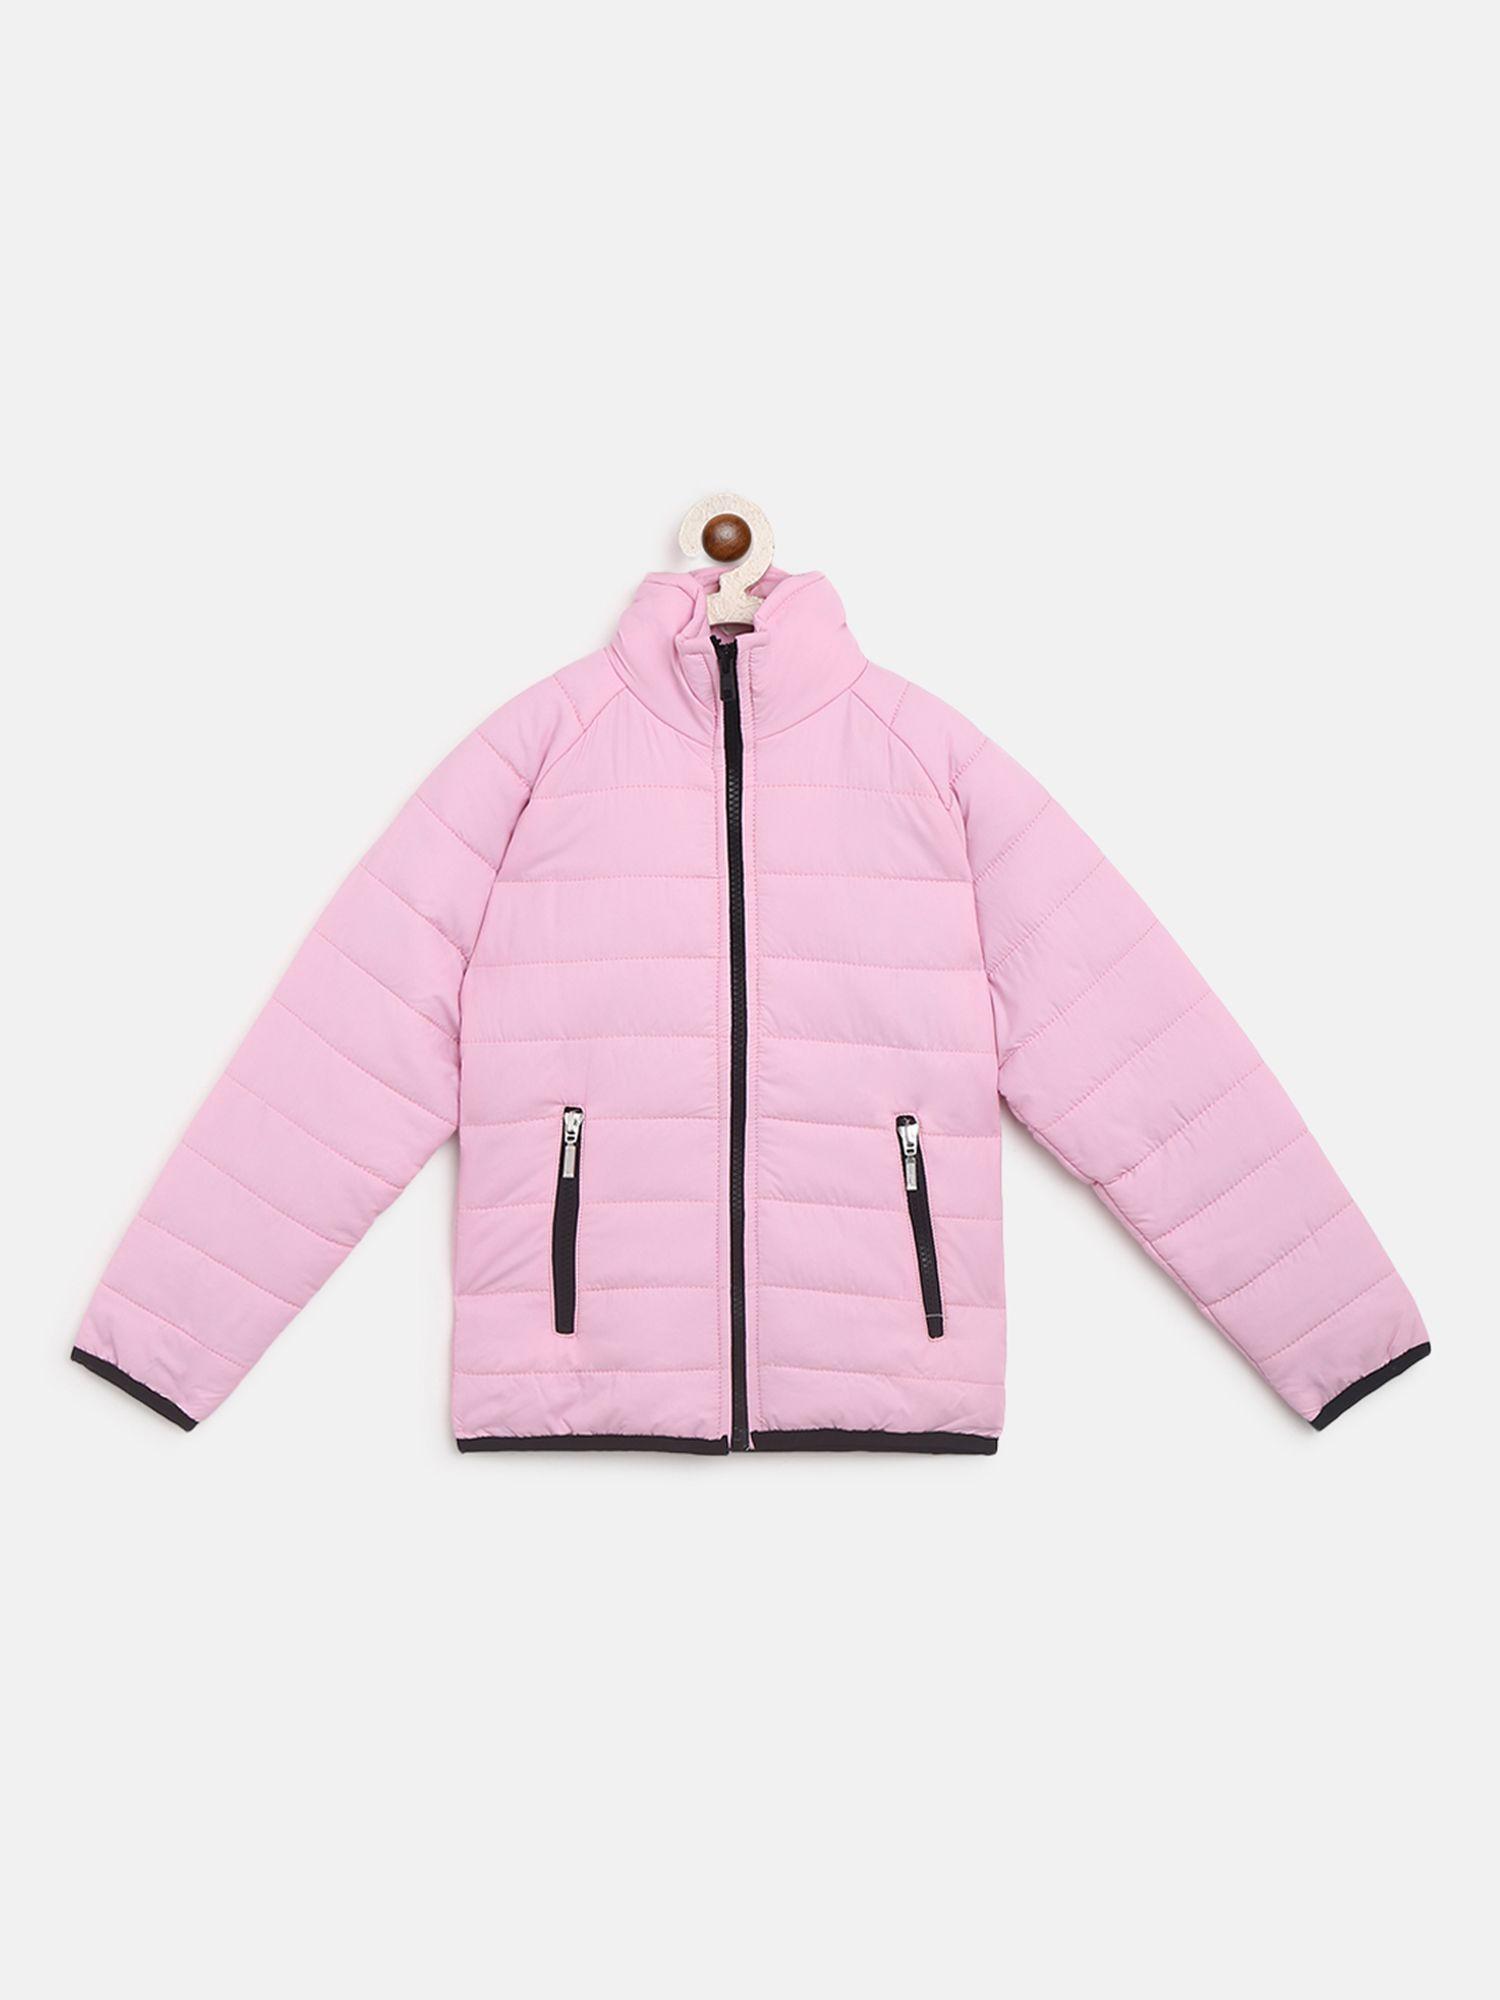 Girls Solid Stylish Casual Bomber Jackets-Pink